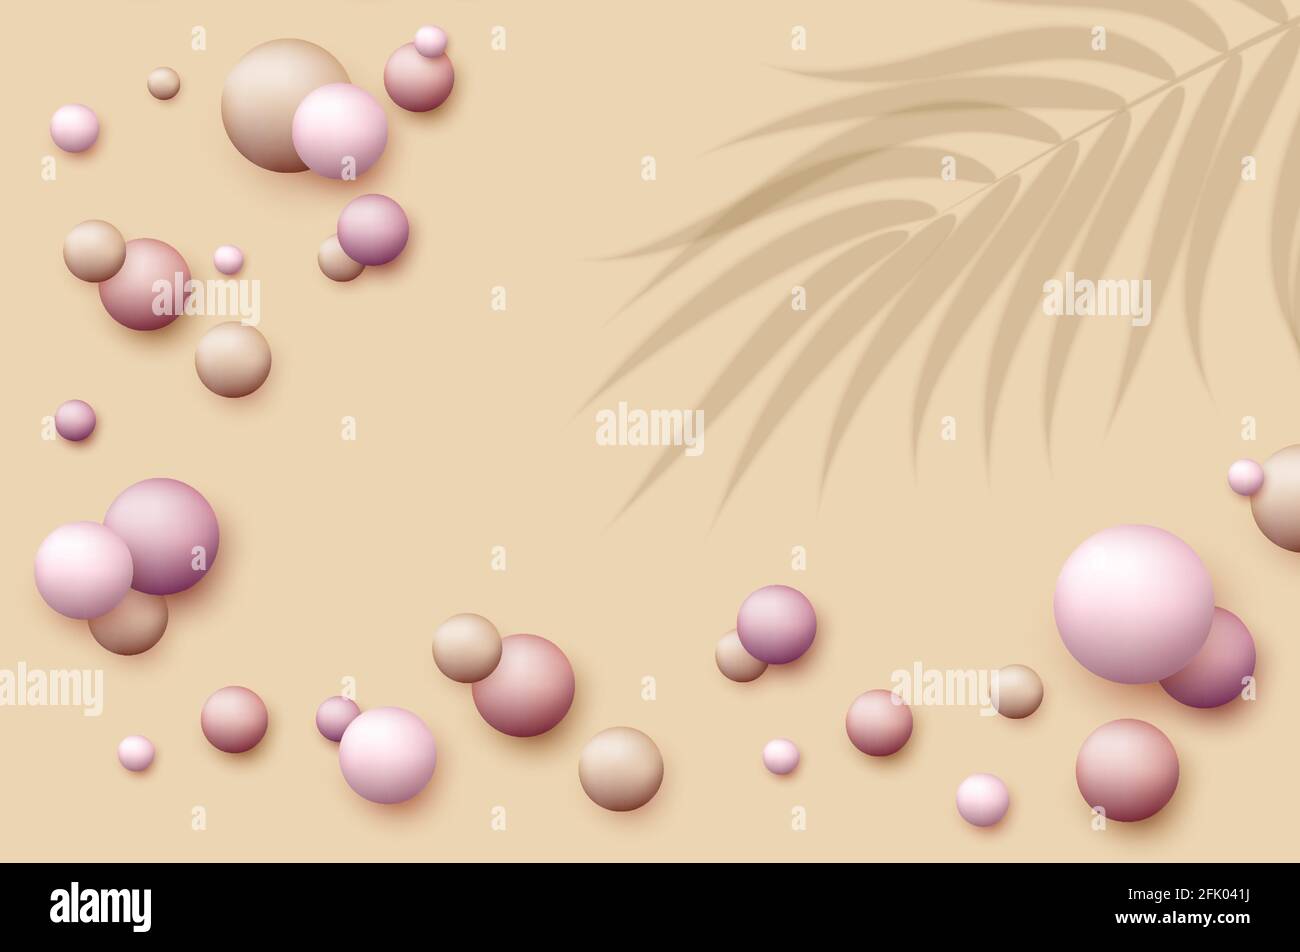 Vector dynamic background with colorful realistic 3d balls. Round sphere in pearls pastel colors with overlay palm leaves shadow. Powder balls Stock Vector